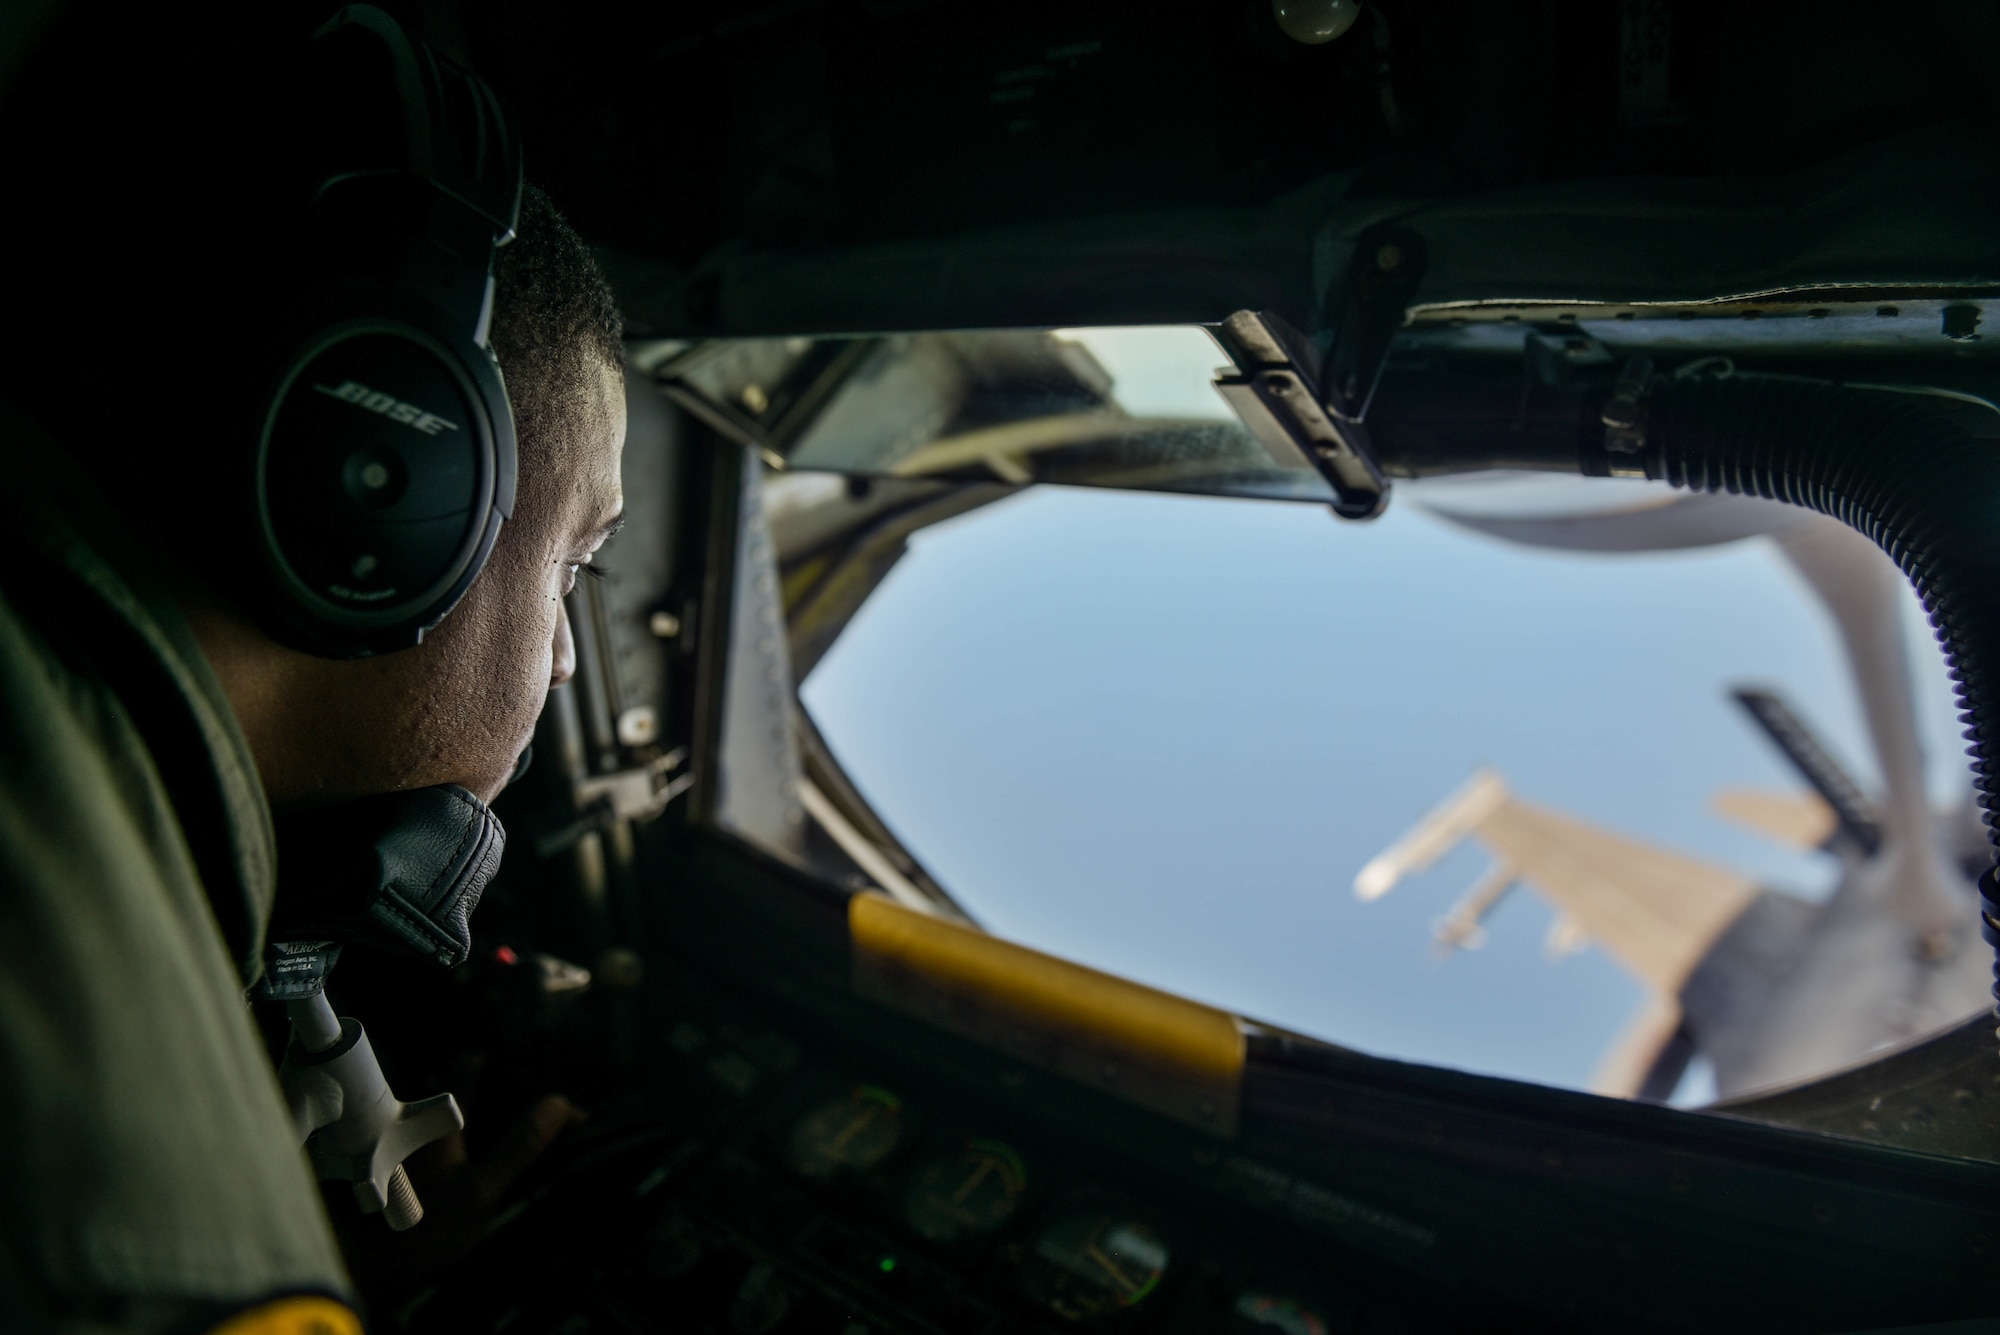 U.S. Air Force Technical Sergeant Shane Williams, 203rd Air Refueling Squadron Boom Operator, refuels a F-16 Fighting Falcon from Tulsa Air National Guard Base in Tulsa, Oklahoma, during the Sentry Aloha exercise at Joint Base Pearl Harbor-Hickam, August 27, 2019.